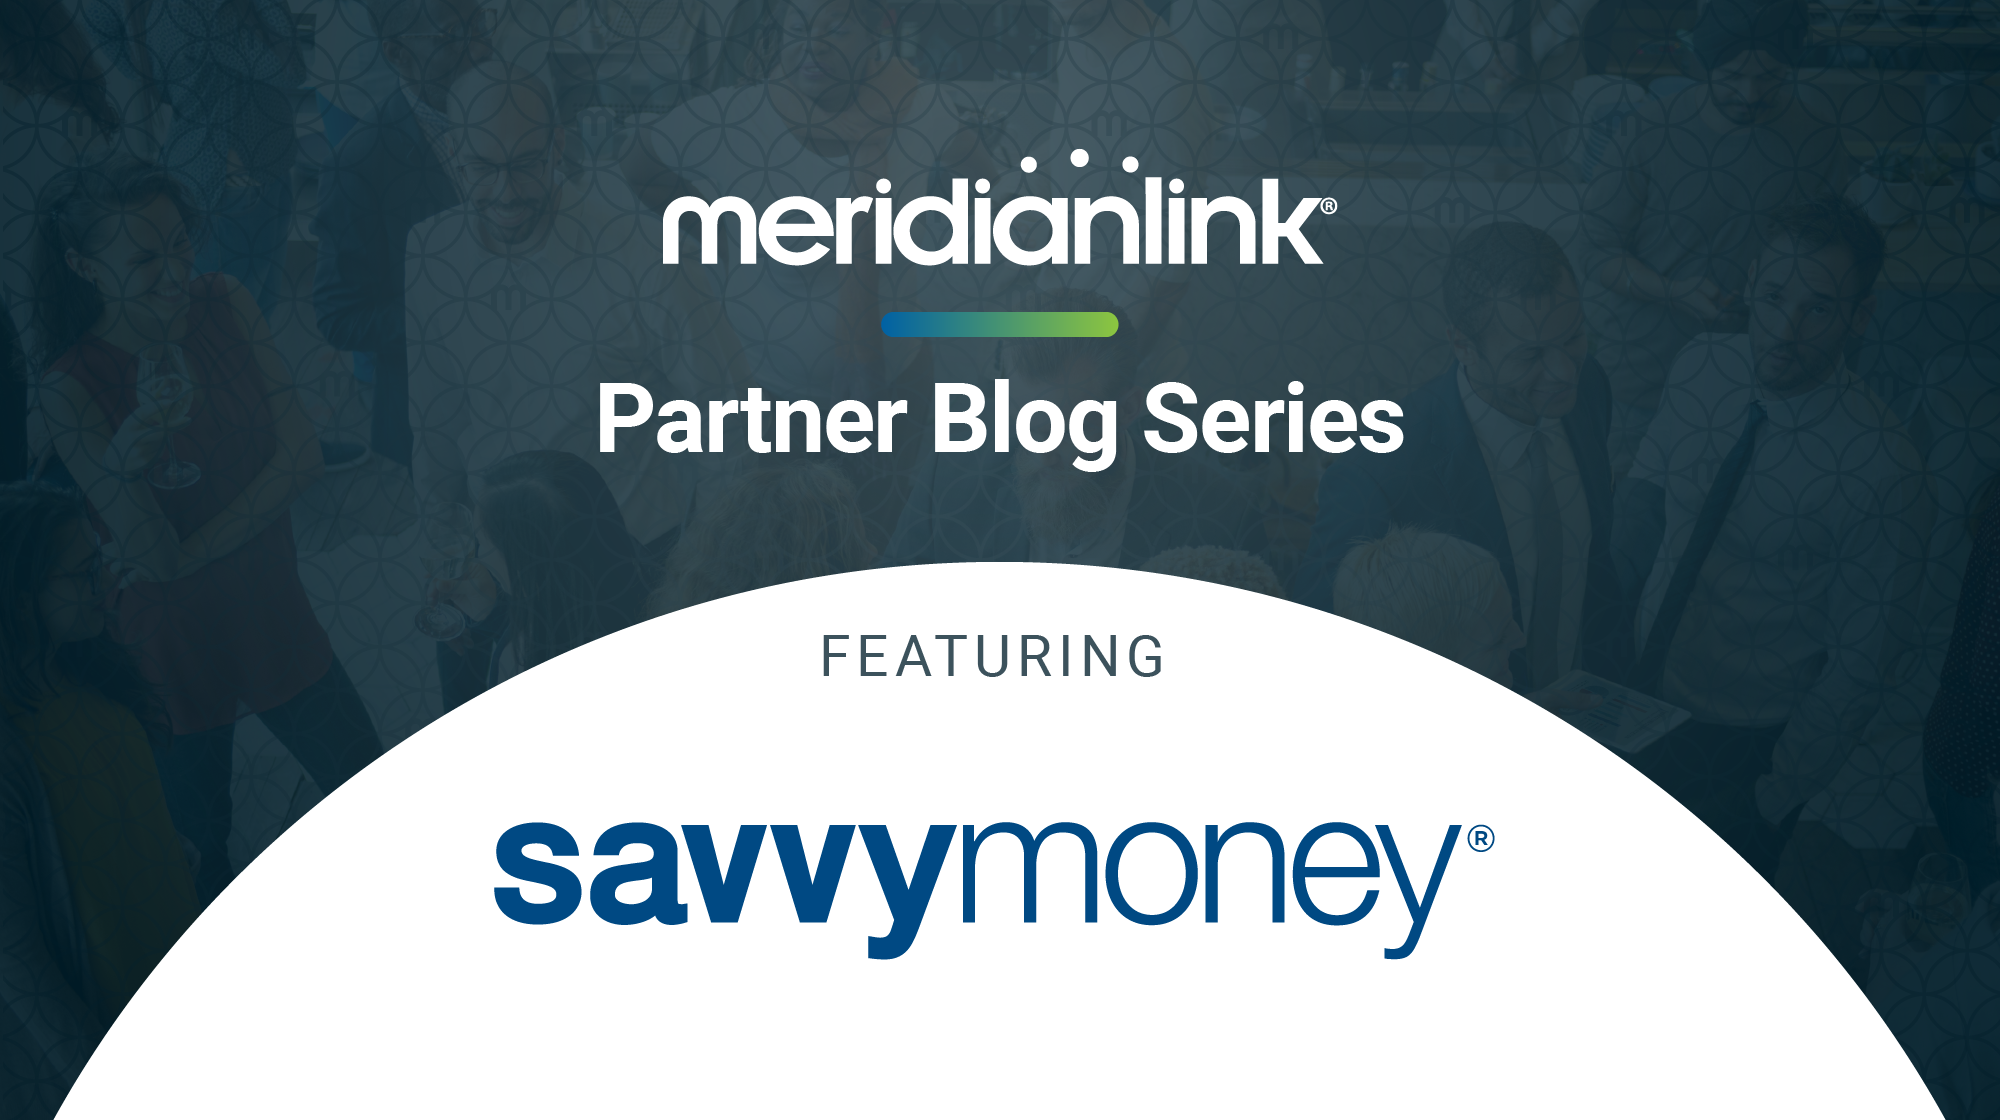 As part of the MeridianLink Partner Blog Series, SavvyMoney discusses pre-approved vs pre-qualified credit offers.